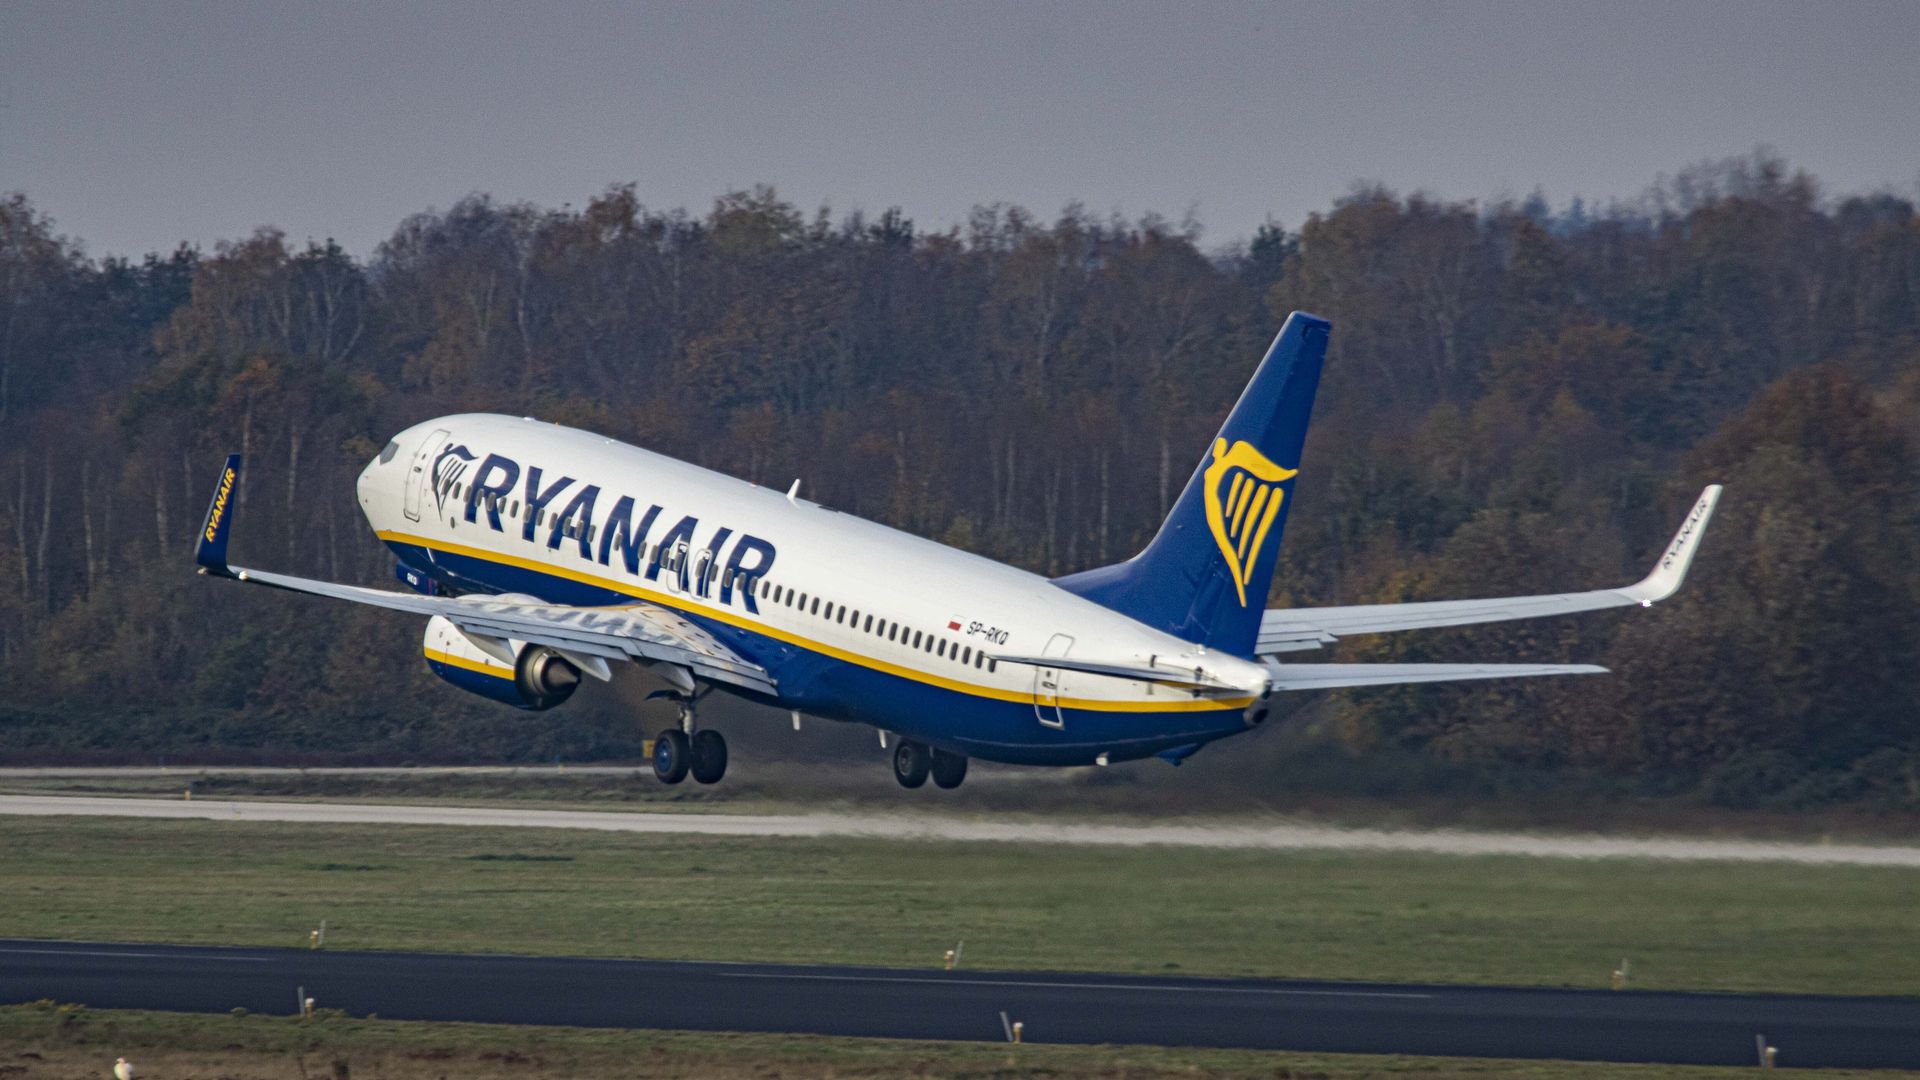 Image of a Ryanair Boeing 737-800 aircraft taking off